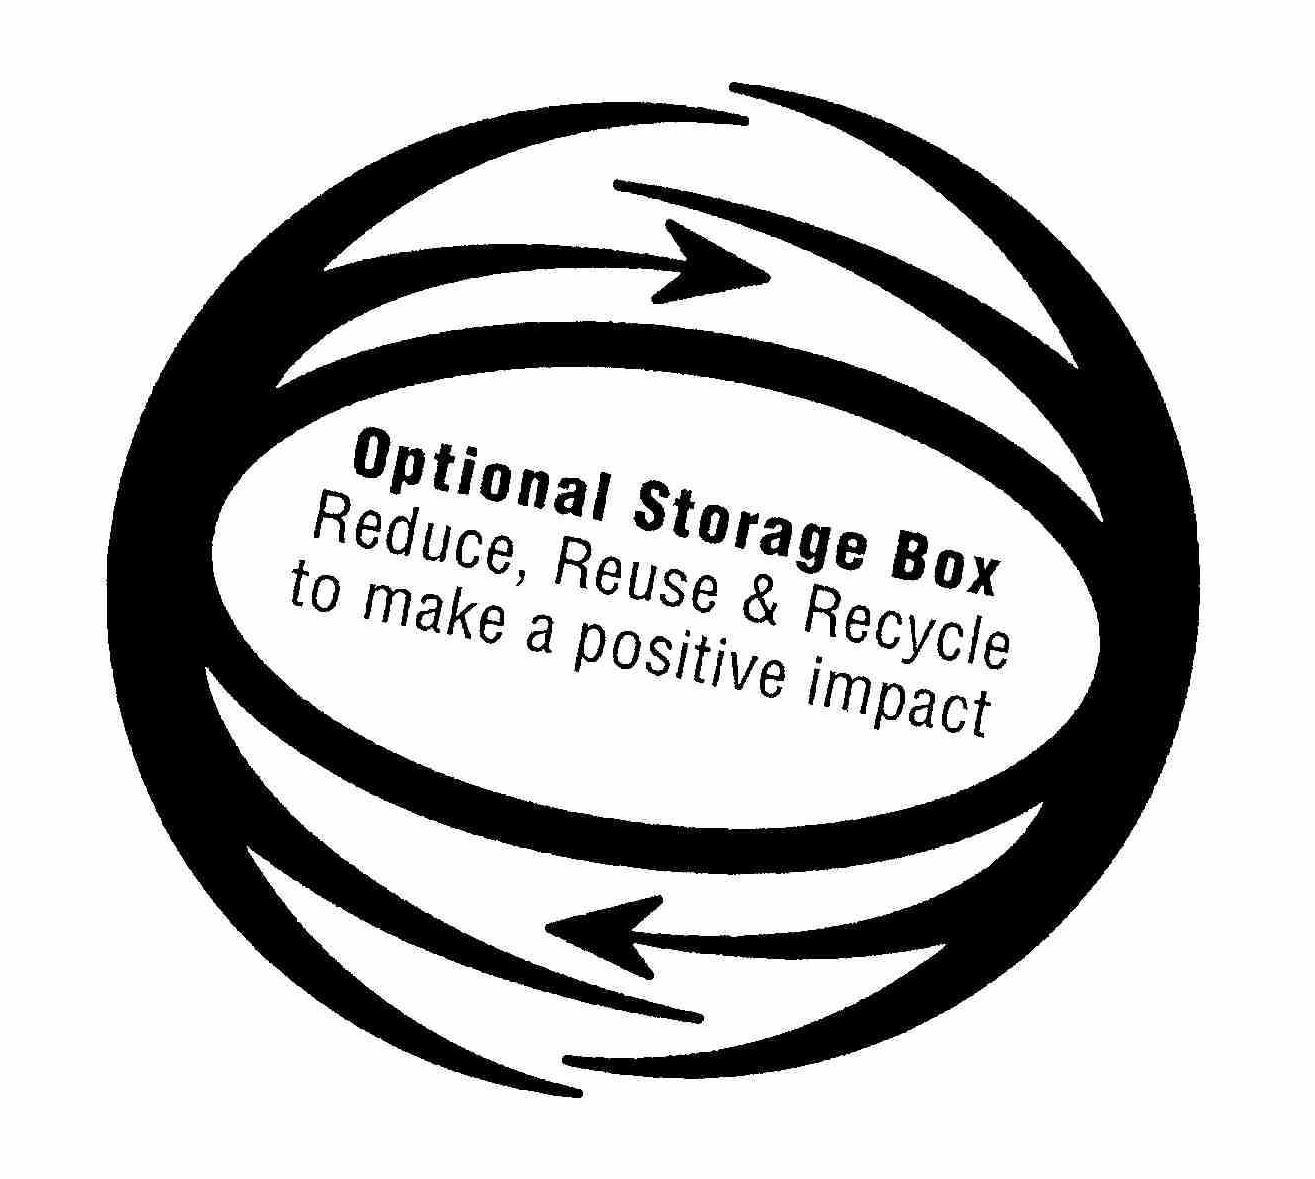  OPTIONAL STORAGE BOX REDUCE, RE-USE &amp; RECYCLE TO MAKE A POSITIVE IMPACT